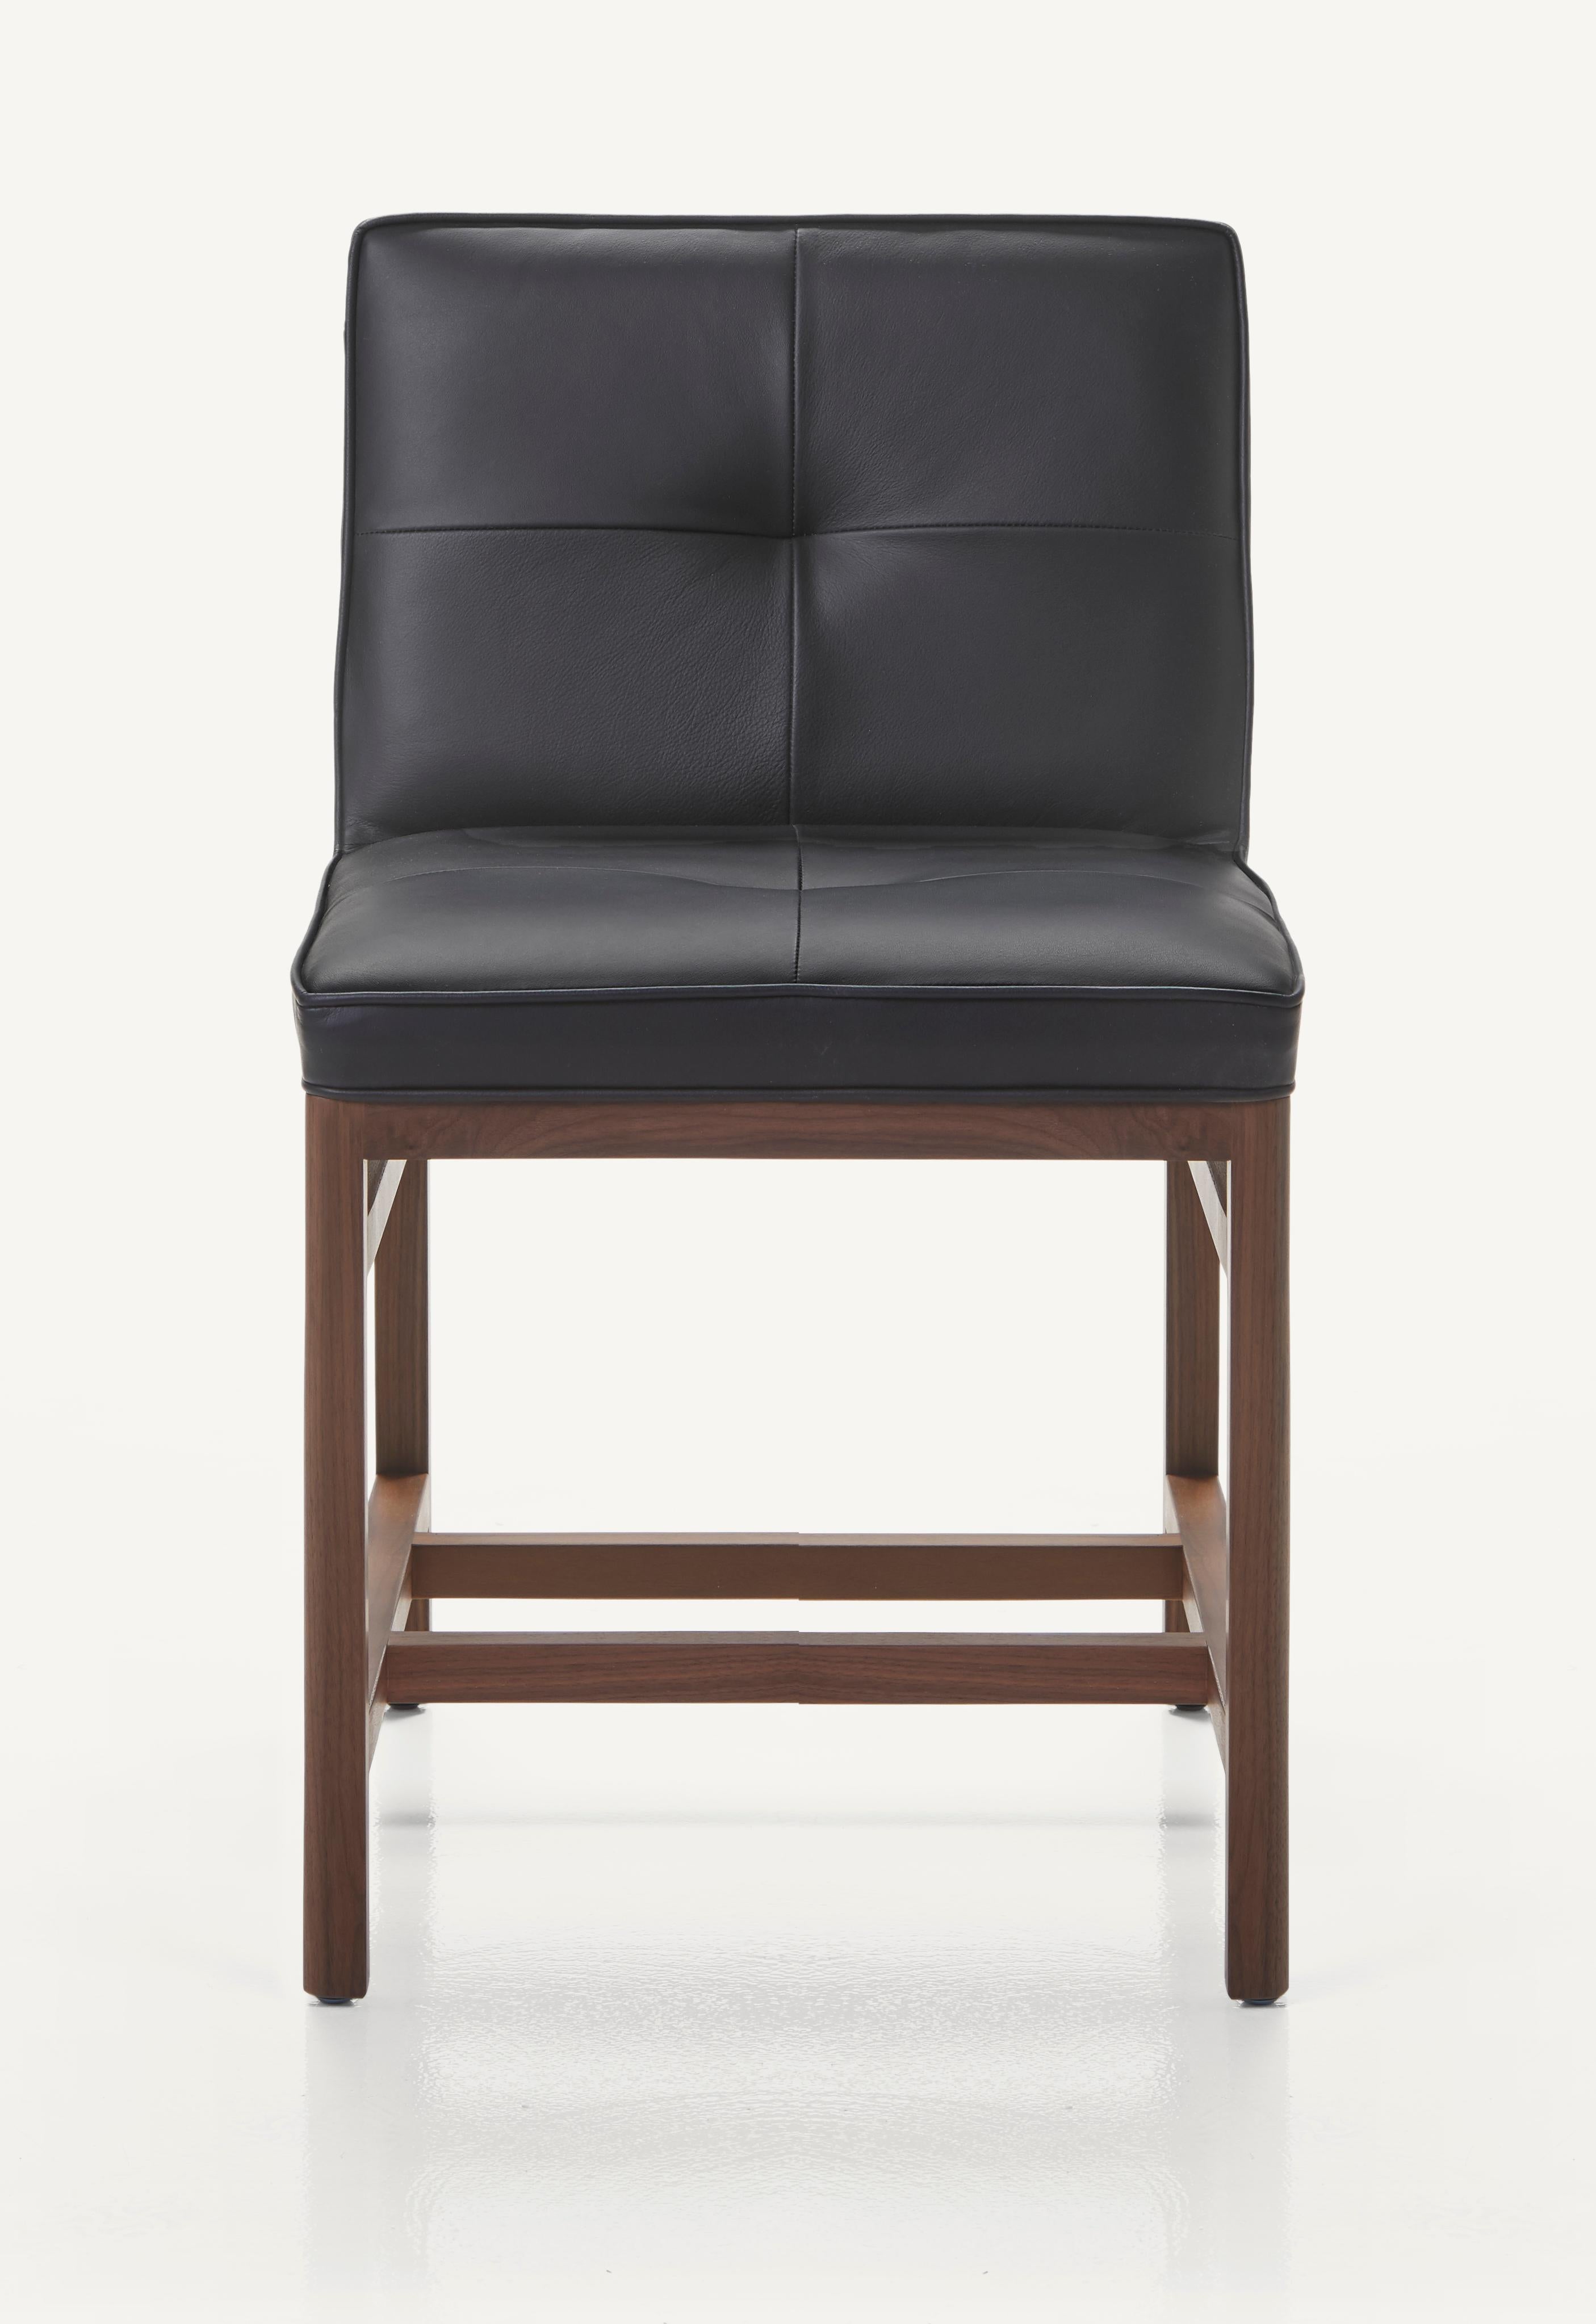 For Sale: Black (Comfort 99991 Black) Wood Frame Armless Chair Petit in Walnut and Leather Designed by Craig Bassam 3